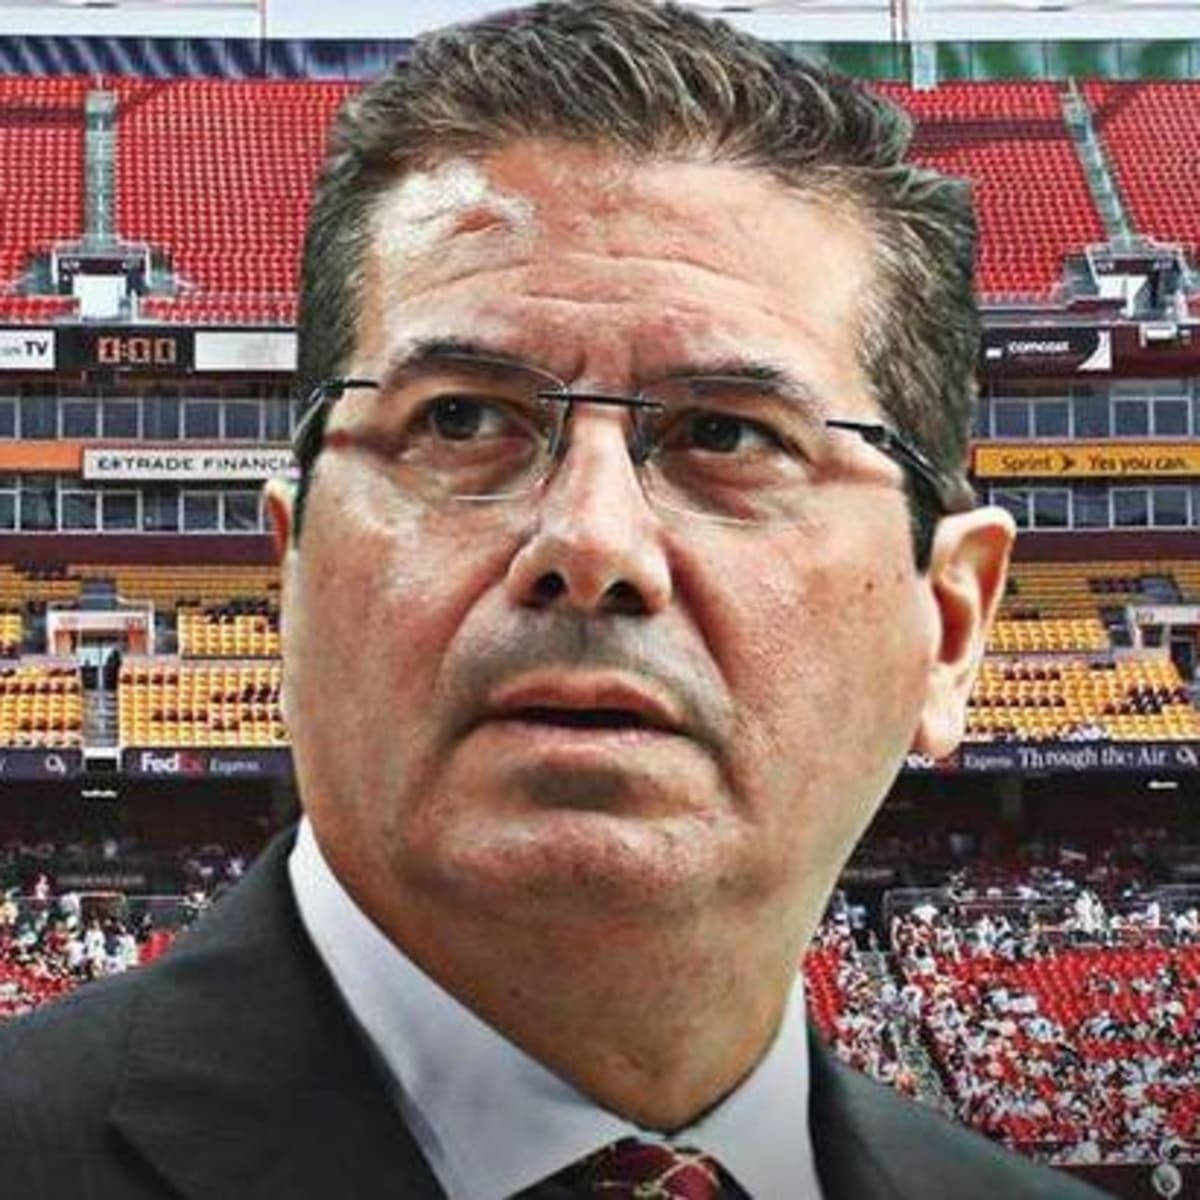 Is Daniel Snyder's Time As Washington Commanders Owner Reaching an End? -  The Ringer